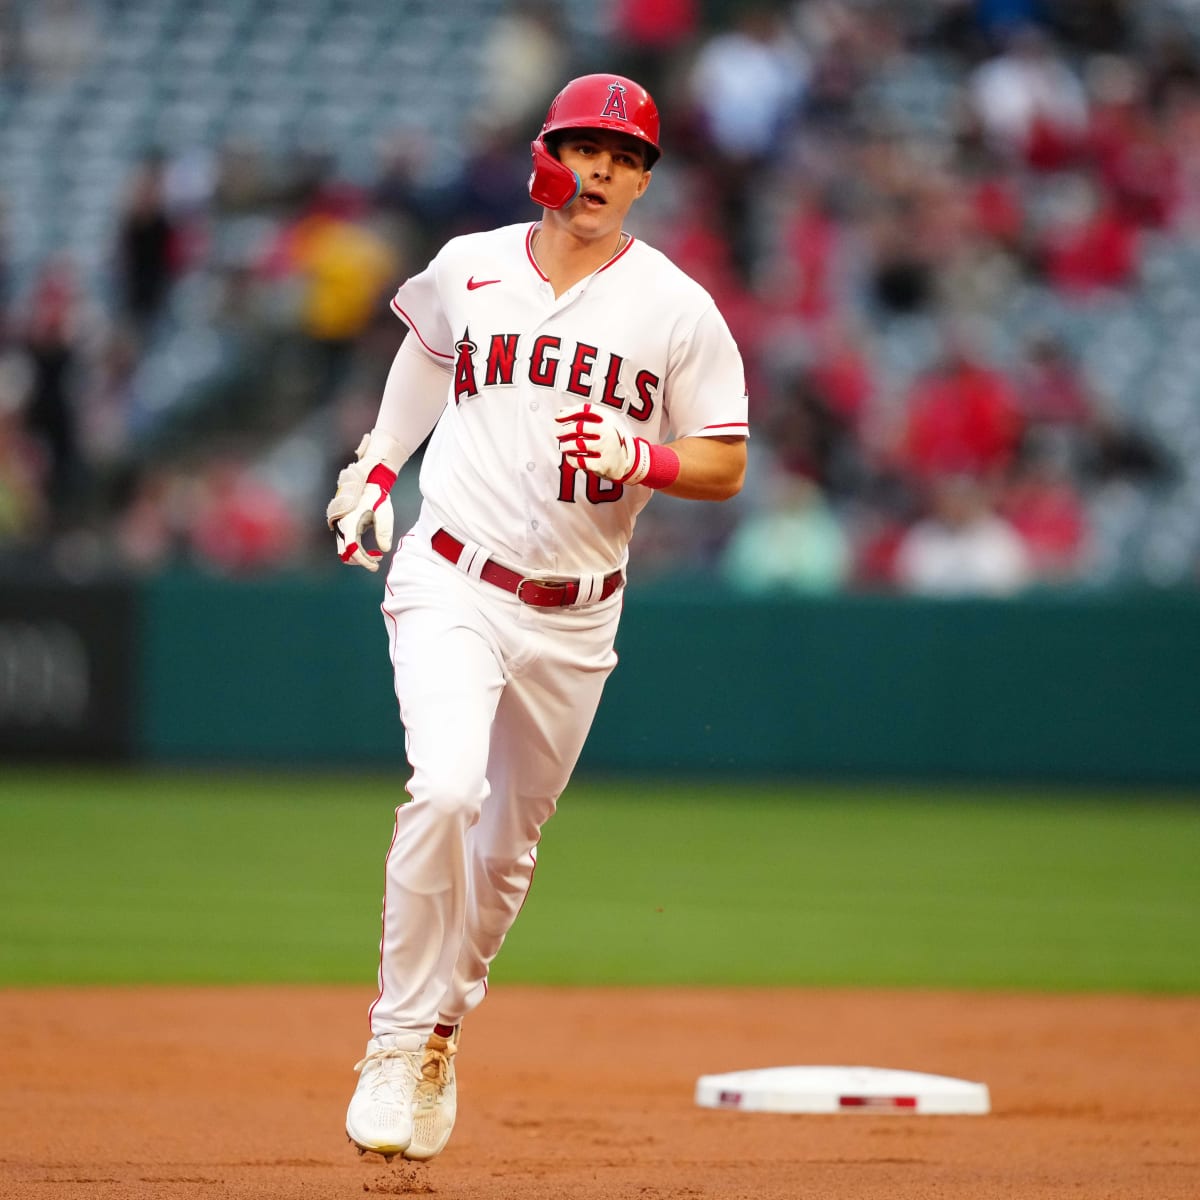 Angels' Mickey Moniak has a kindred spirit in Manager Phil Nevin